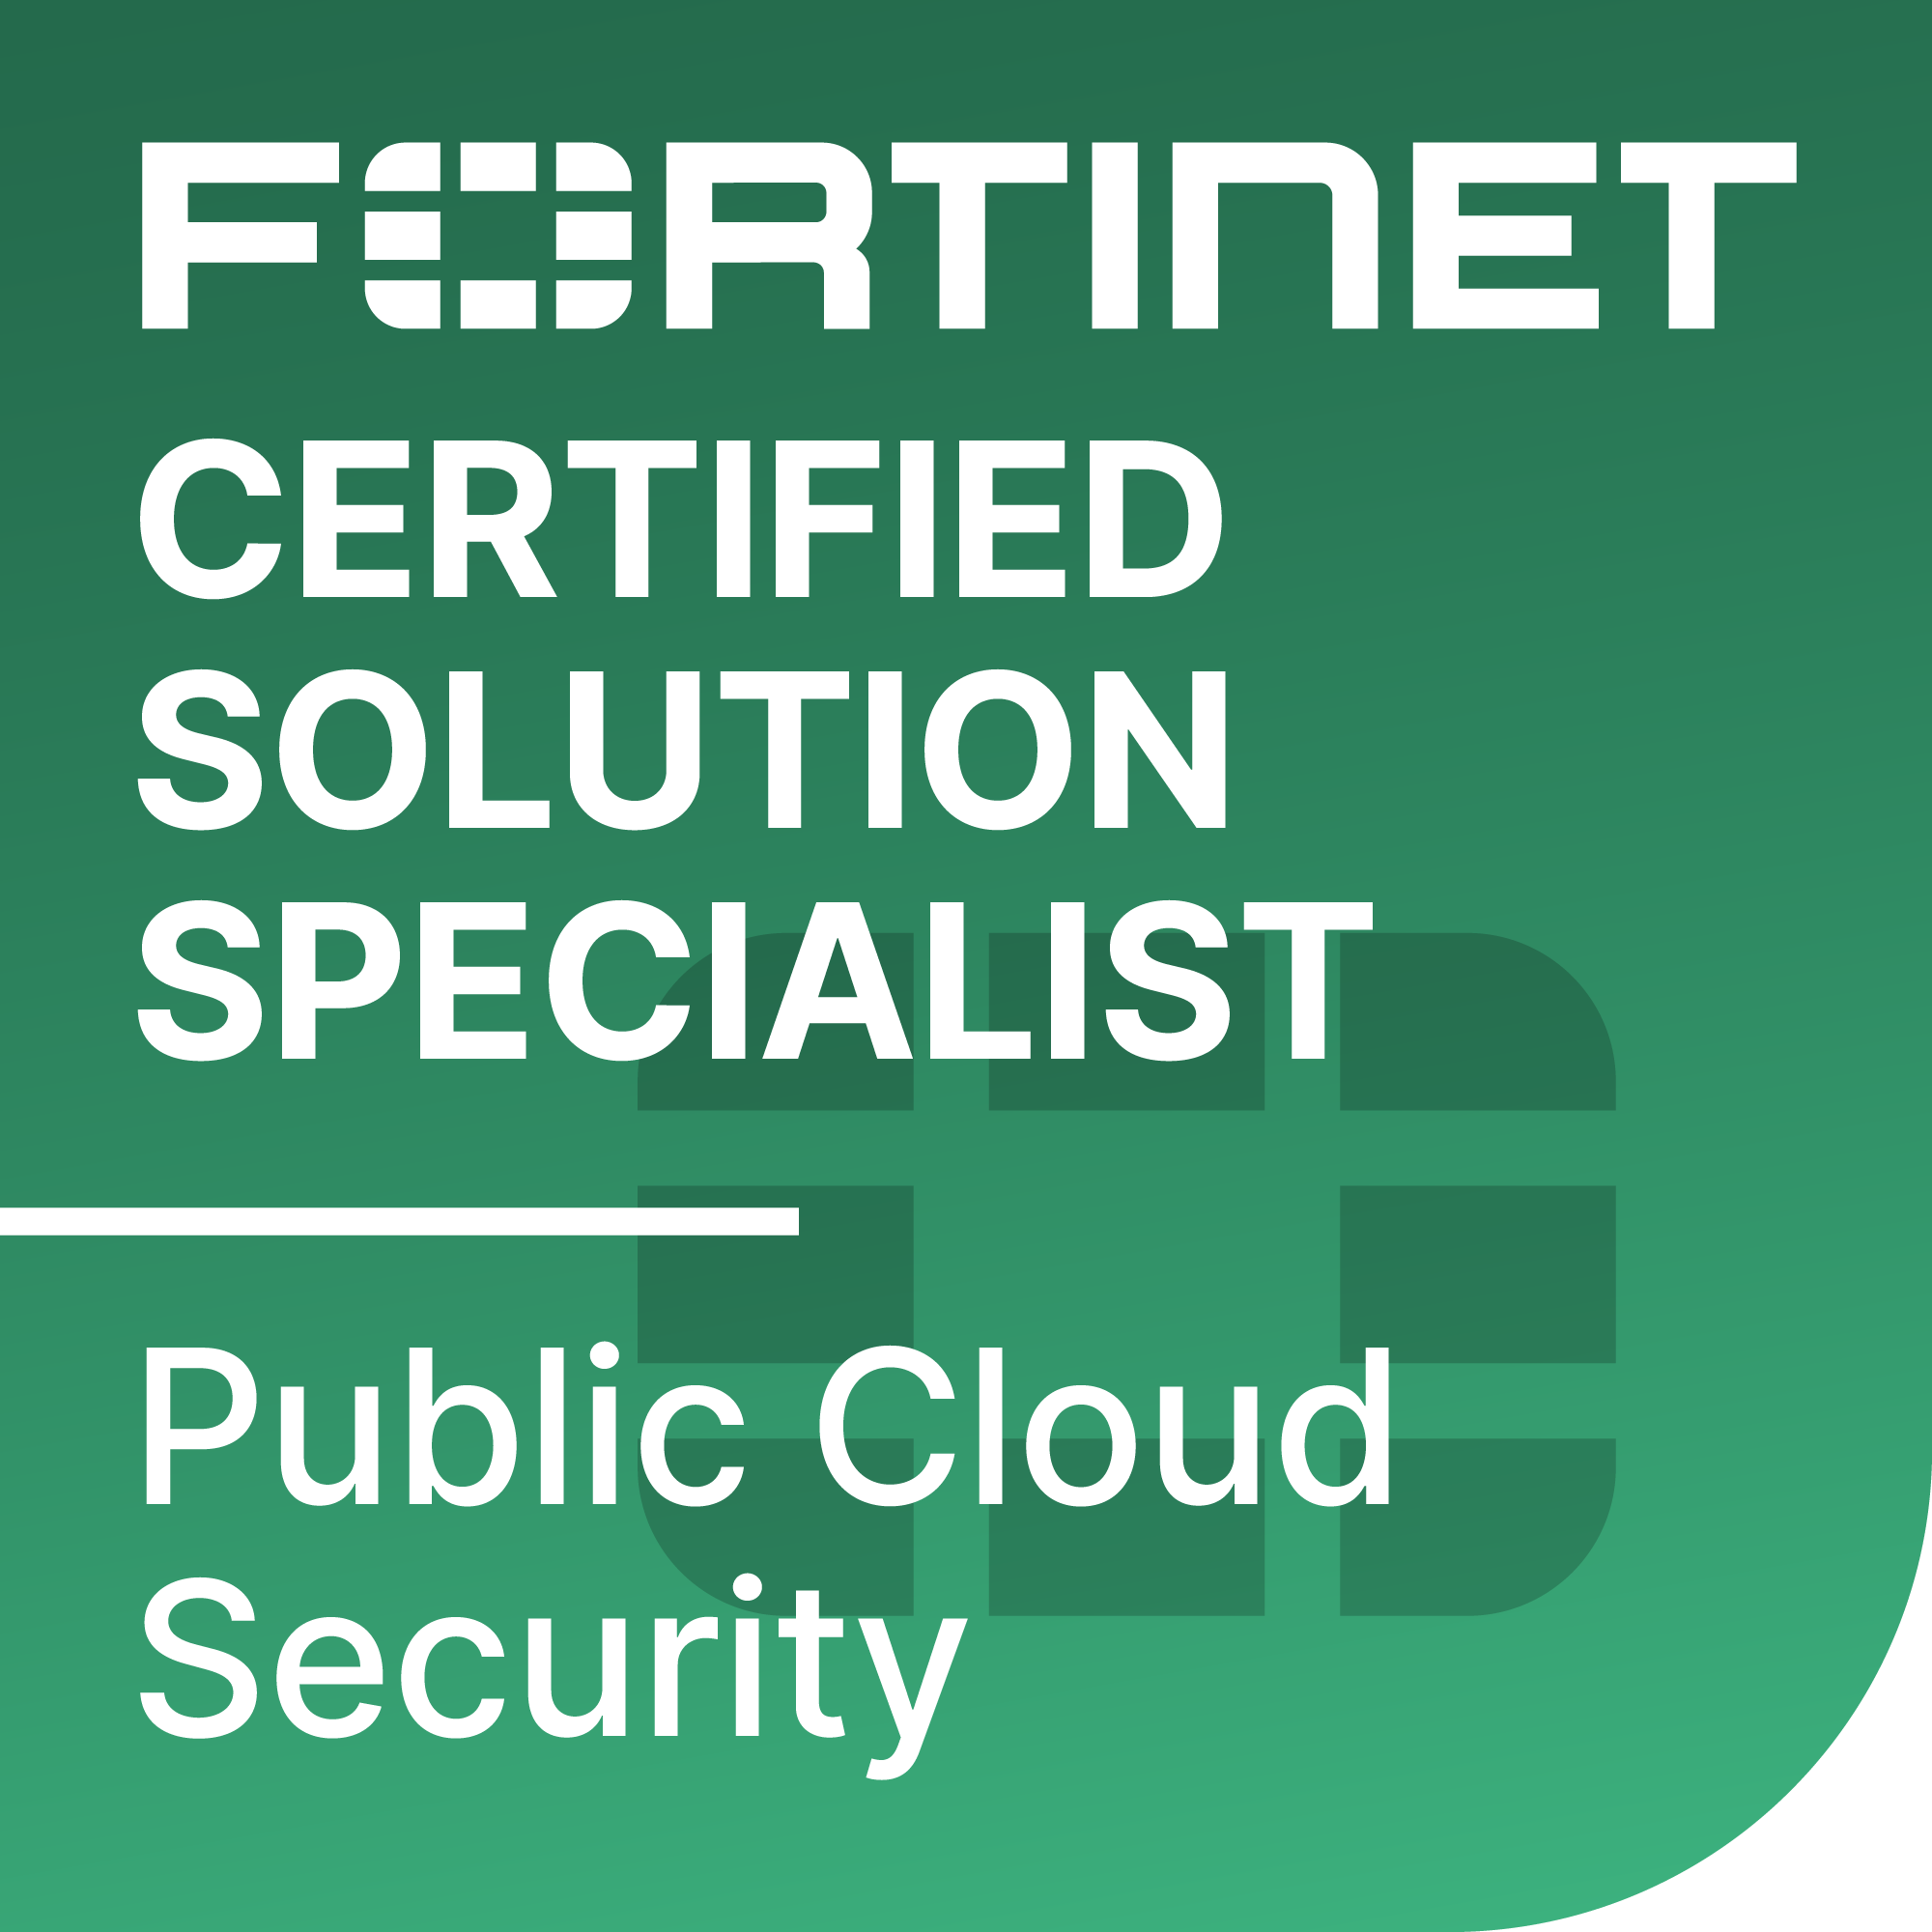 Fortinet Certified Solution Specialist Public Cloud Security badge